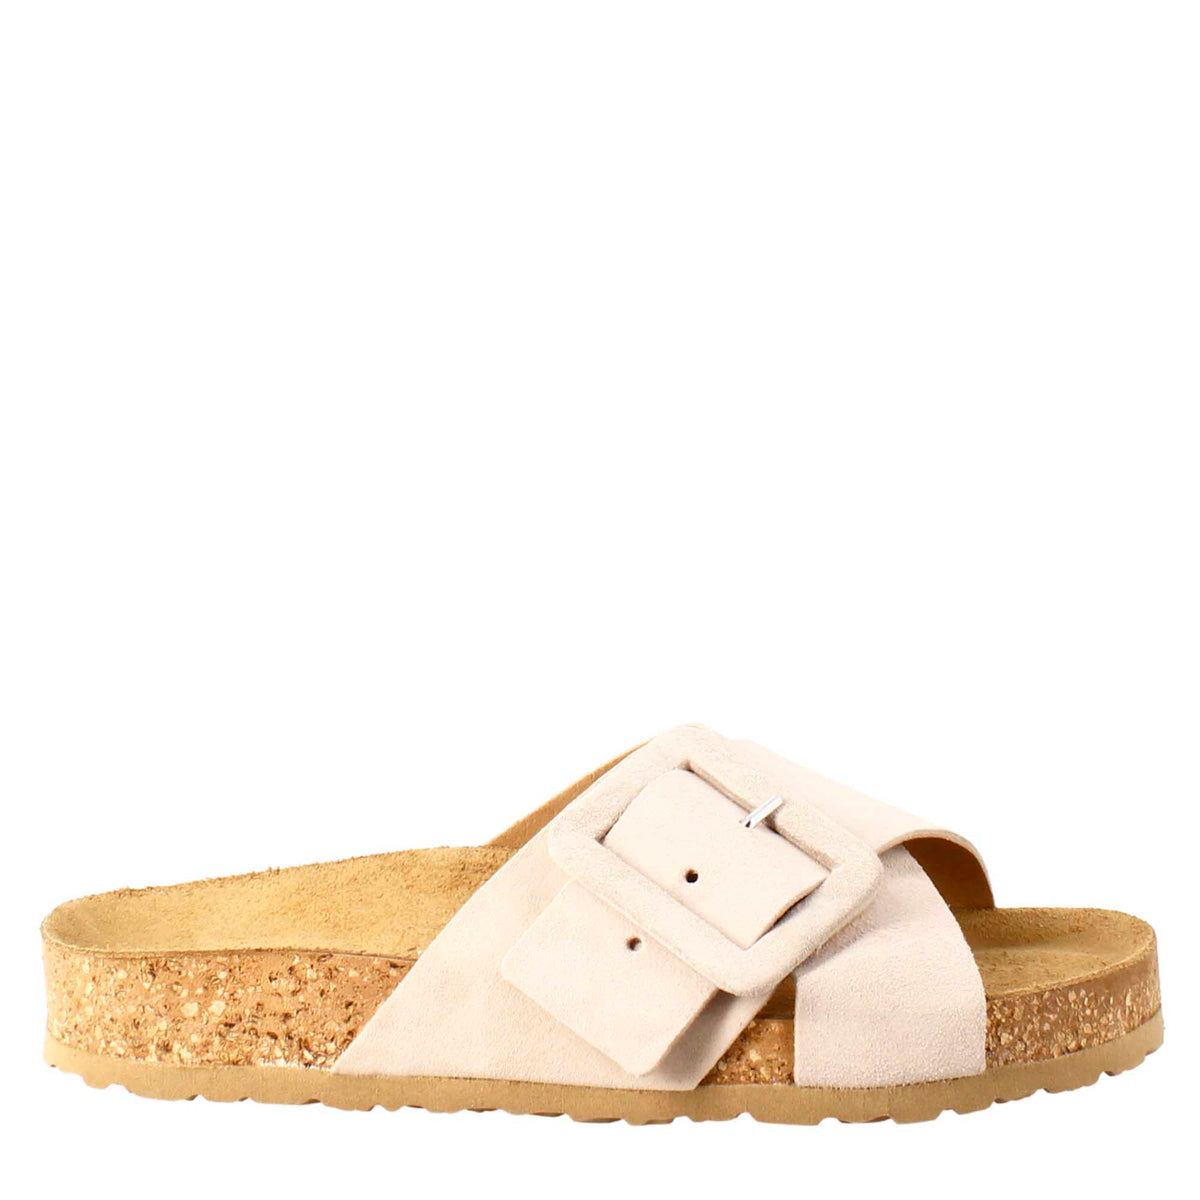 Woman's double band sandal and buckle in beige suede 